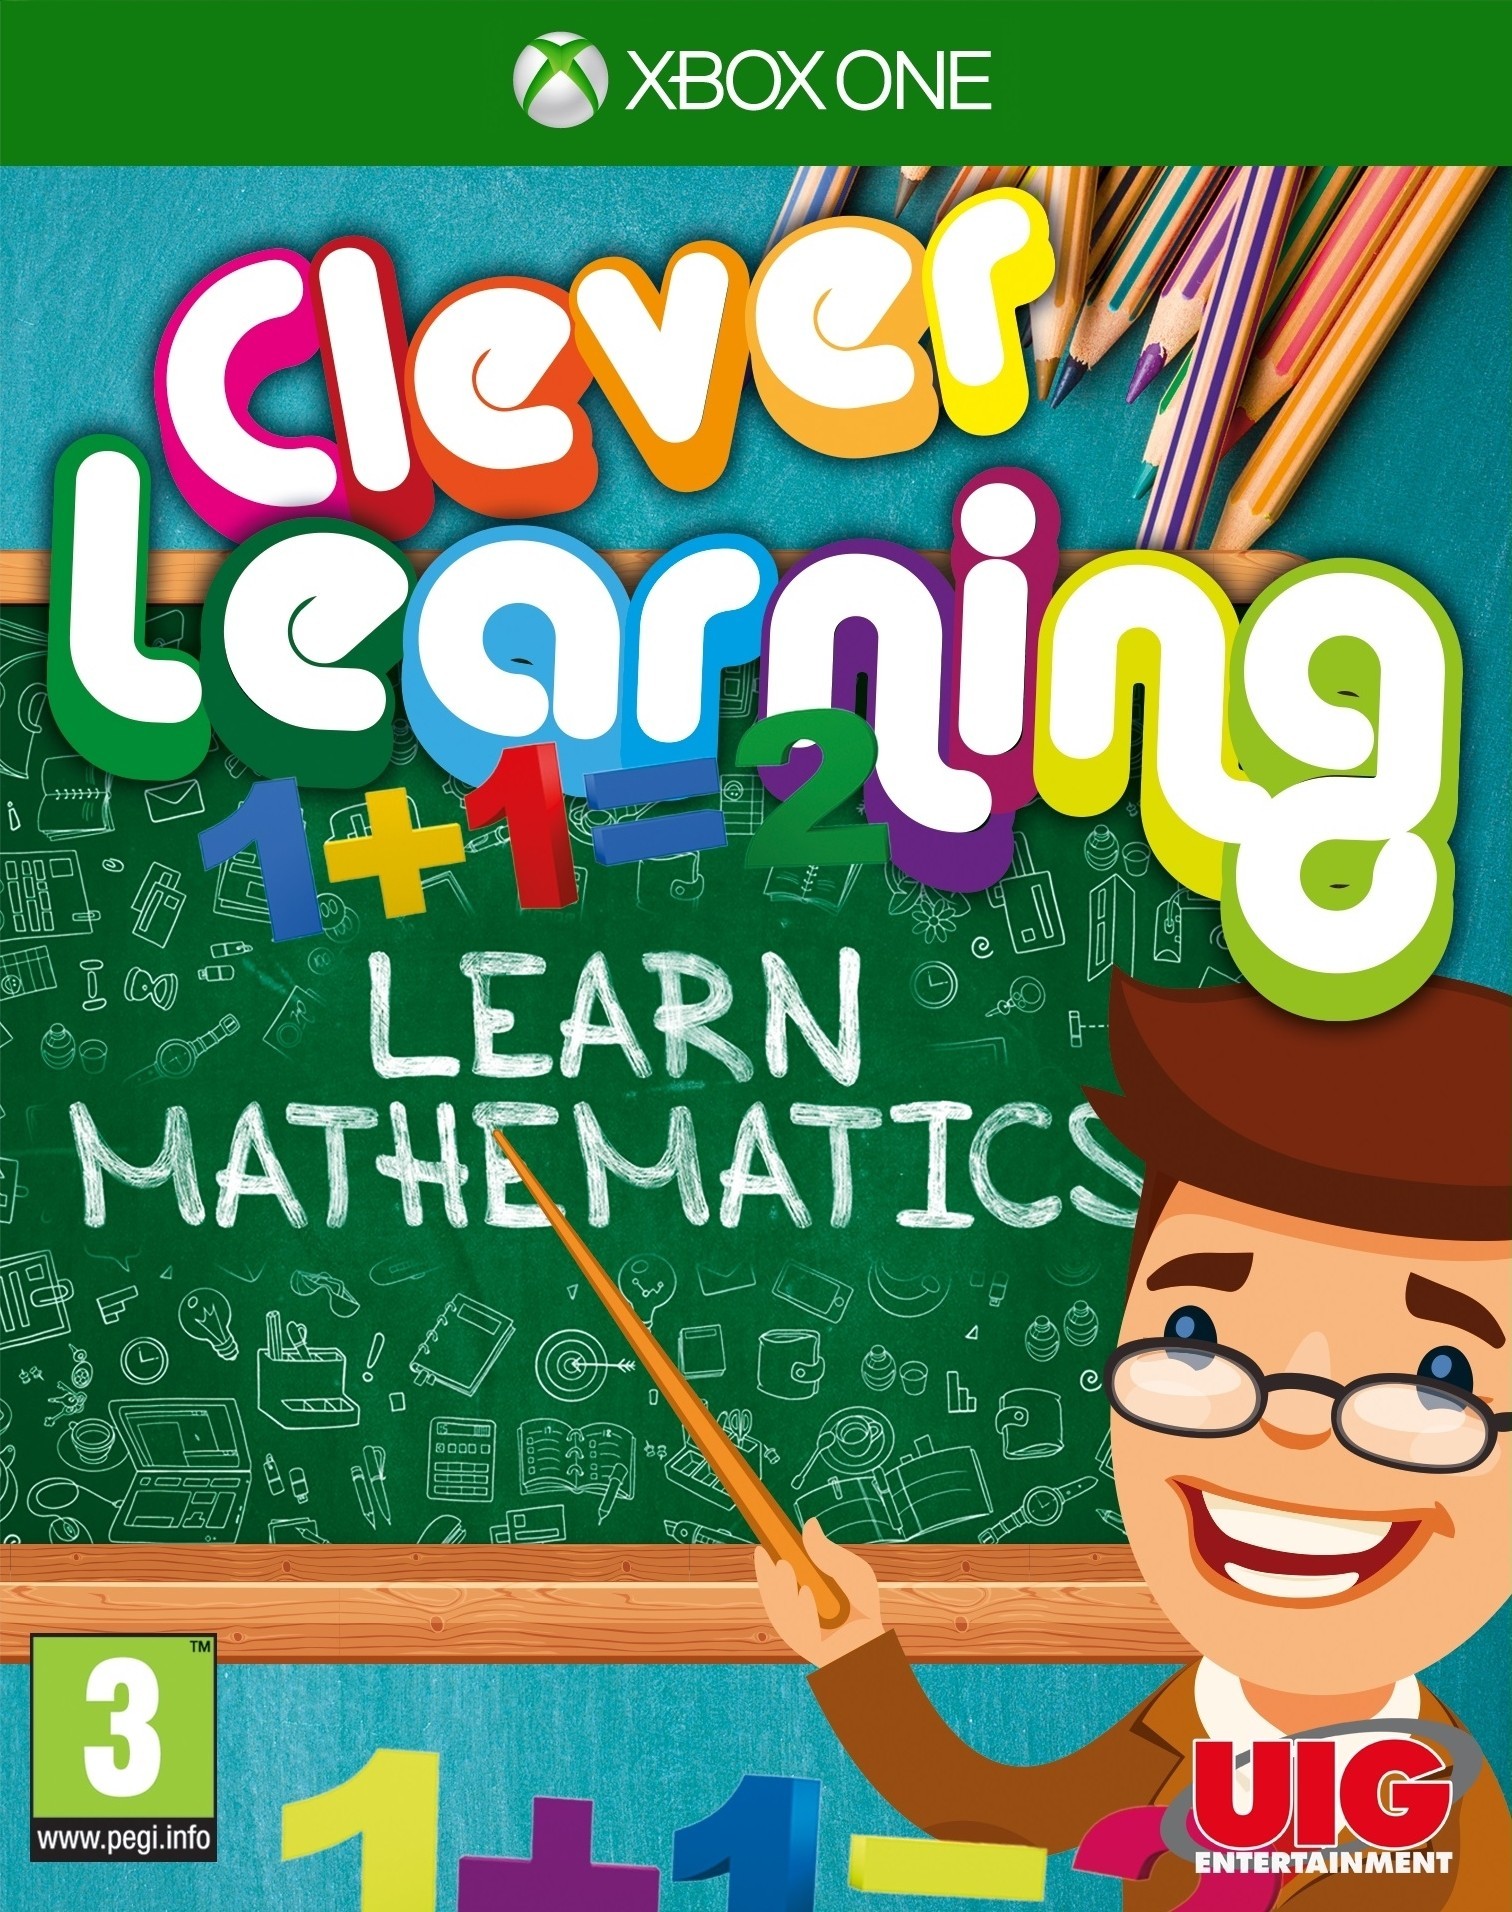 Clever Learning Mathematik 1 + 2 (Xbox One), UIG Entertainment